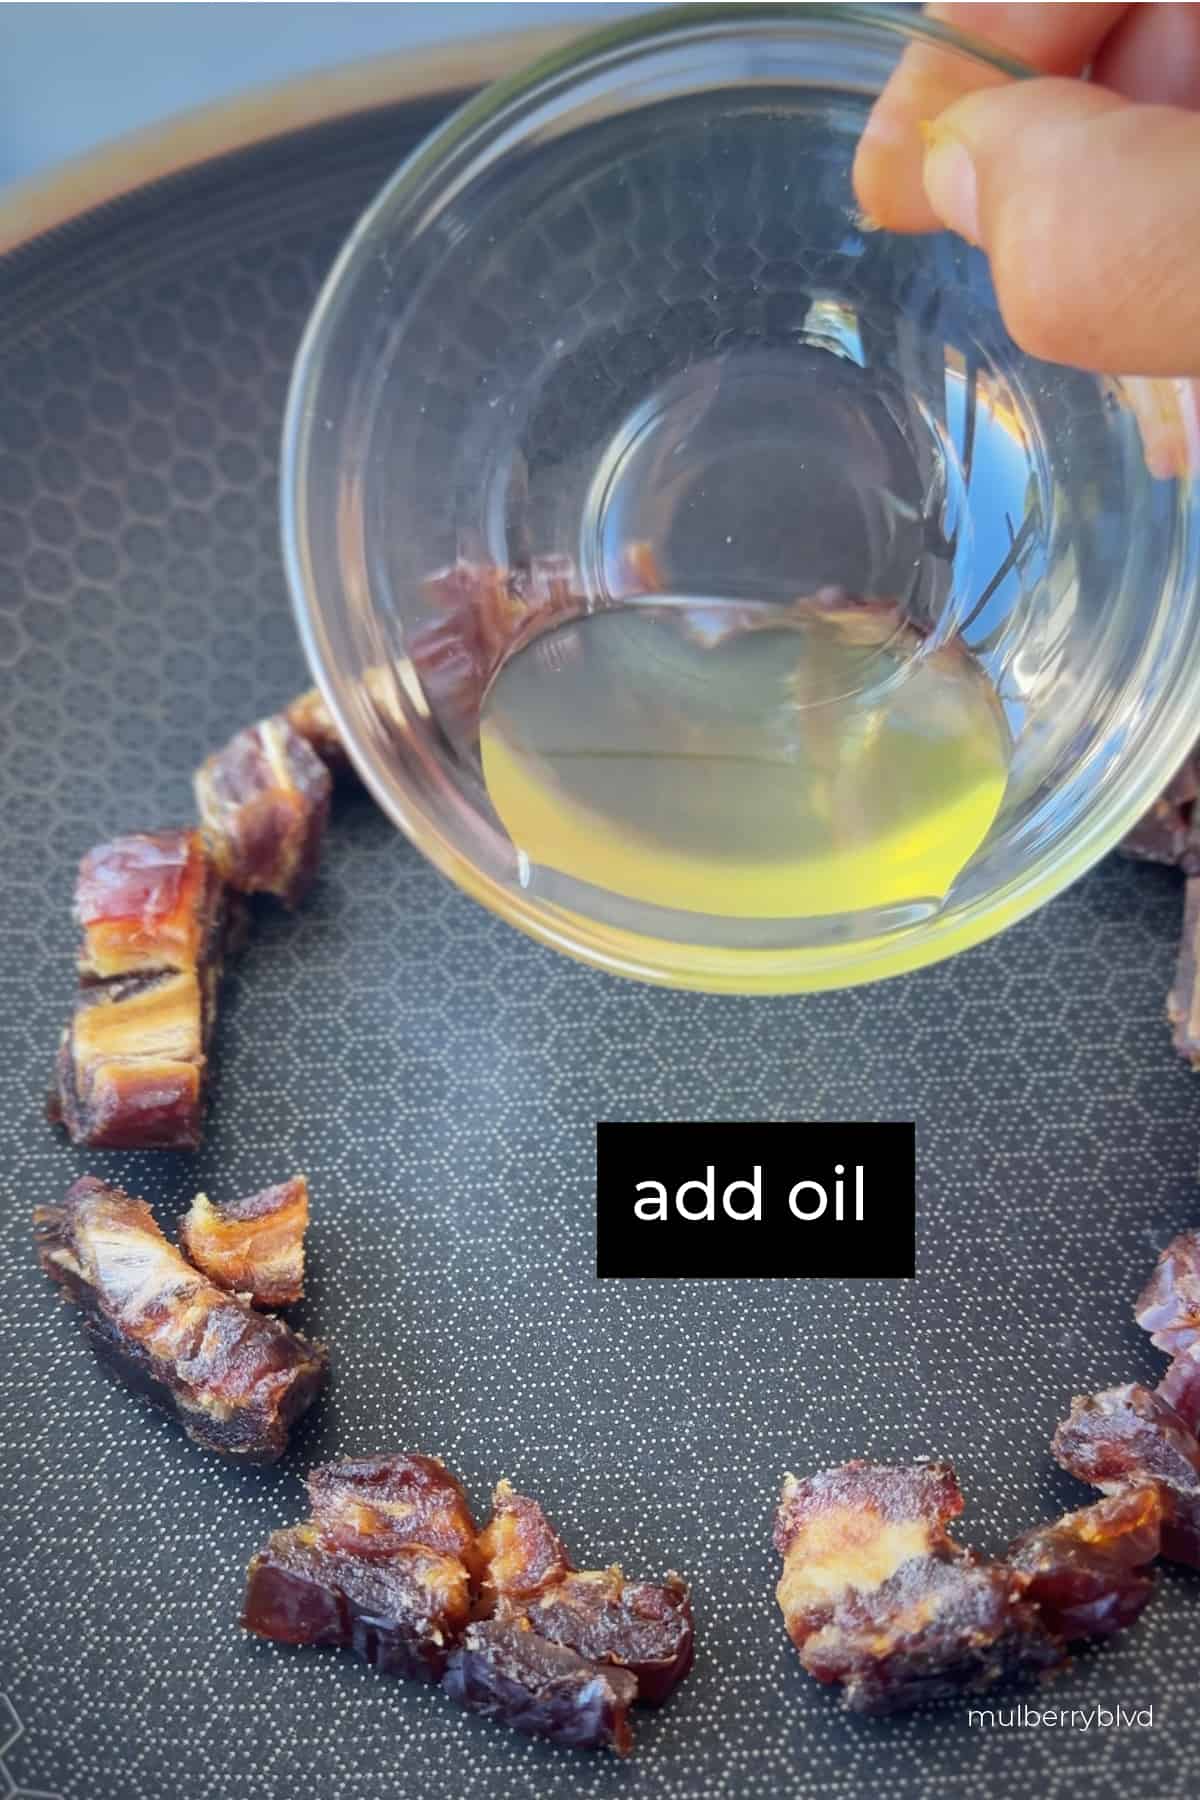 This is an image of chopped up dates arranged around a pan, with a hand holding a small bowl with oil in it, and the caption saying "add oil".